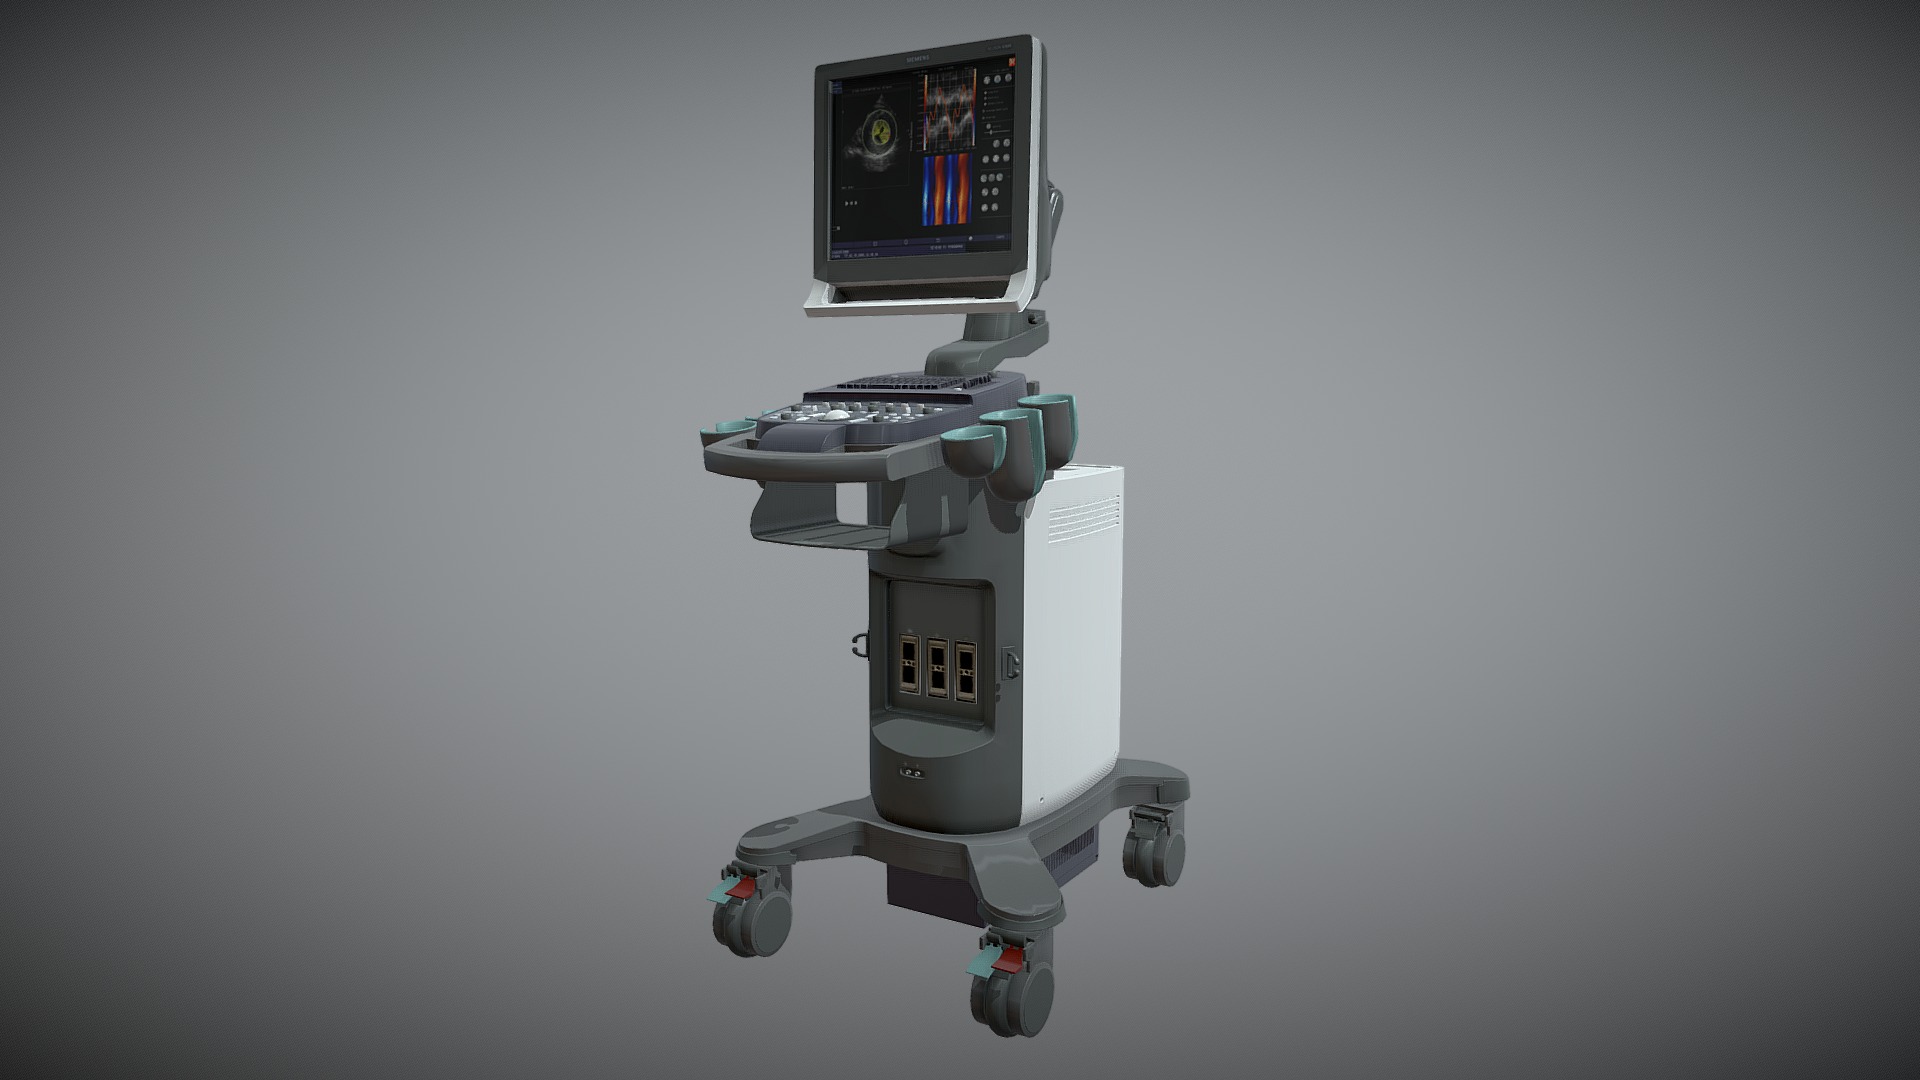 3D model Siemens-x300pe - This is a 3D model of the Siemens-x300pe. The 3D model is about a robot with a screen.